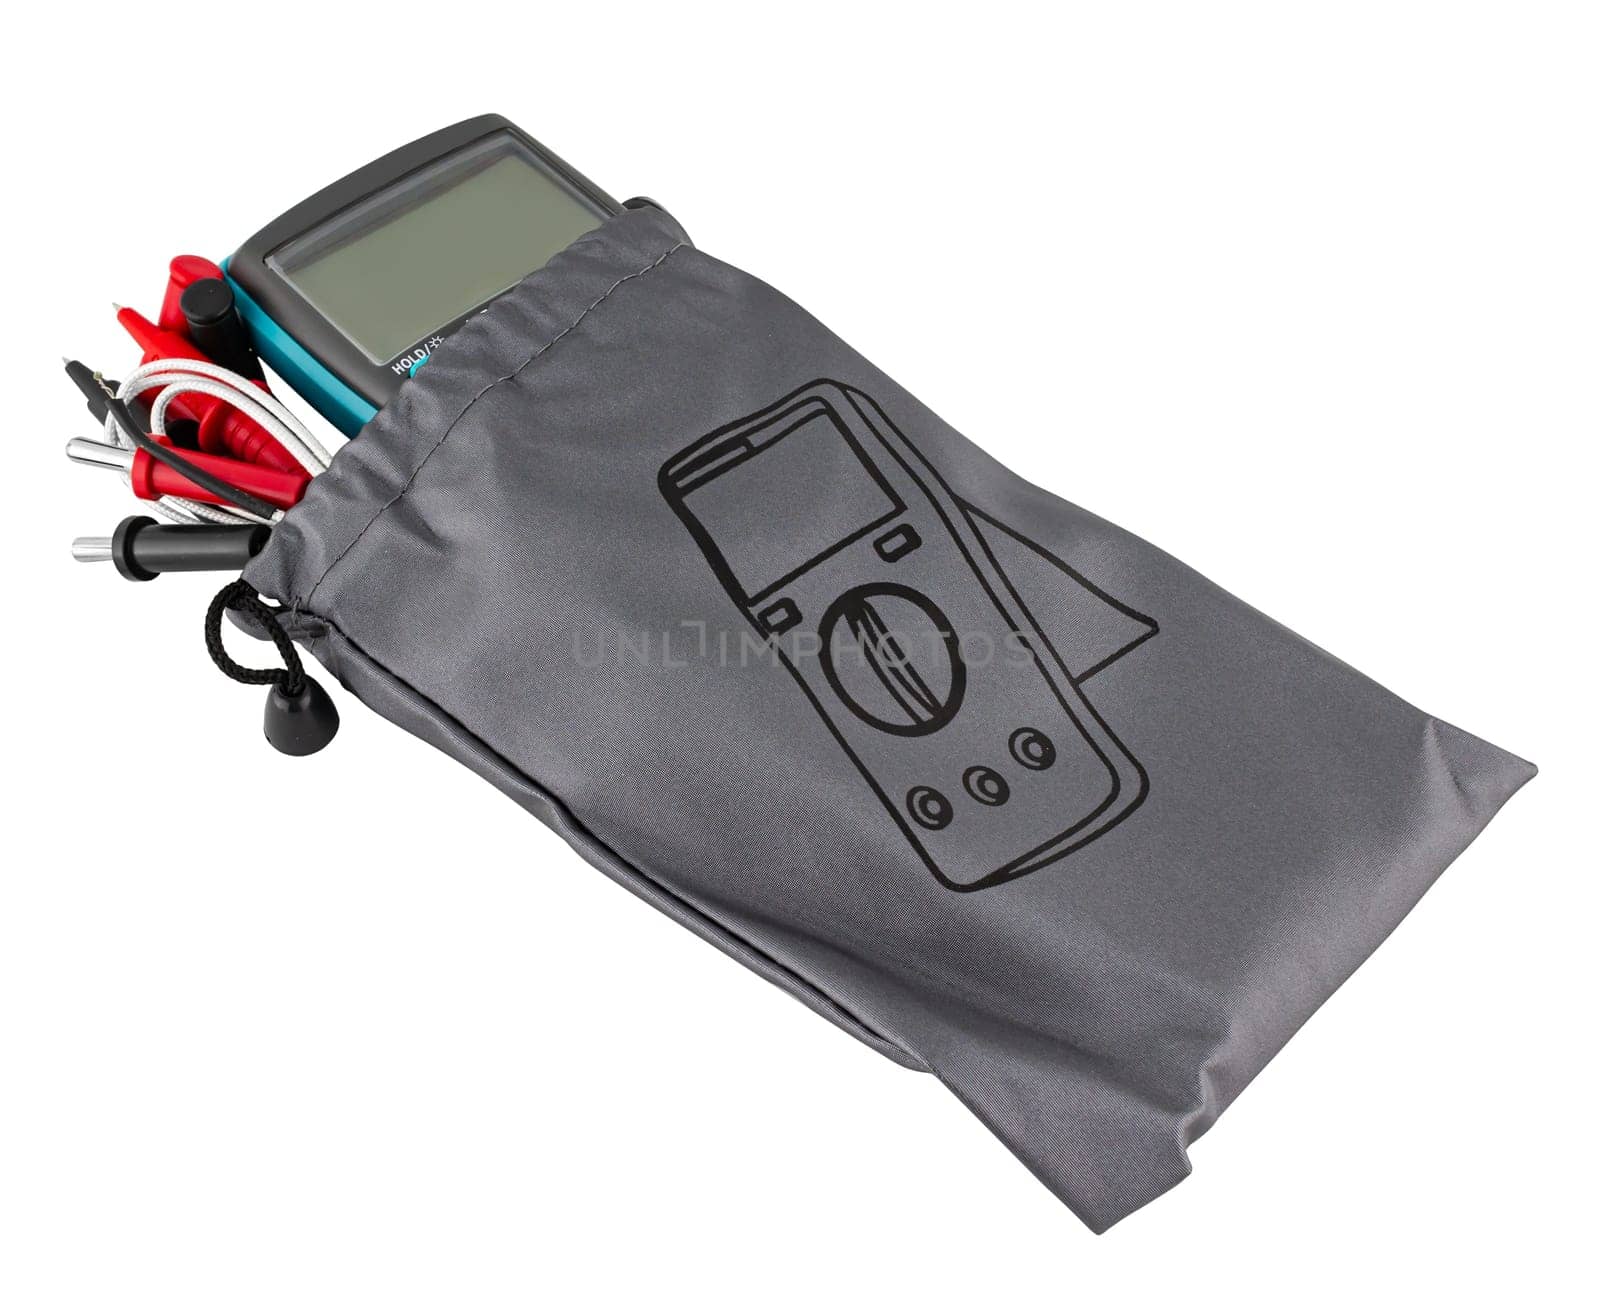 multimeter, measuring instrument of various characteristics of an electrical signal, on a white background